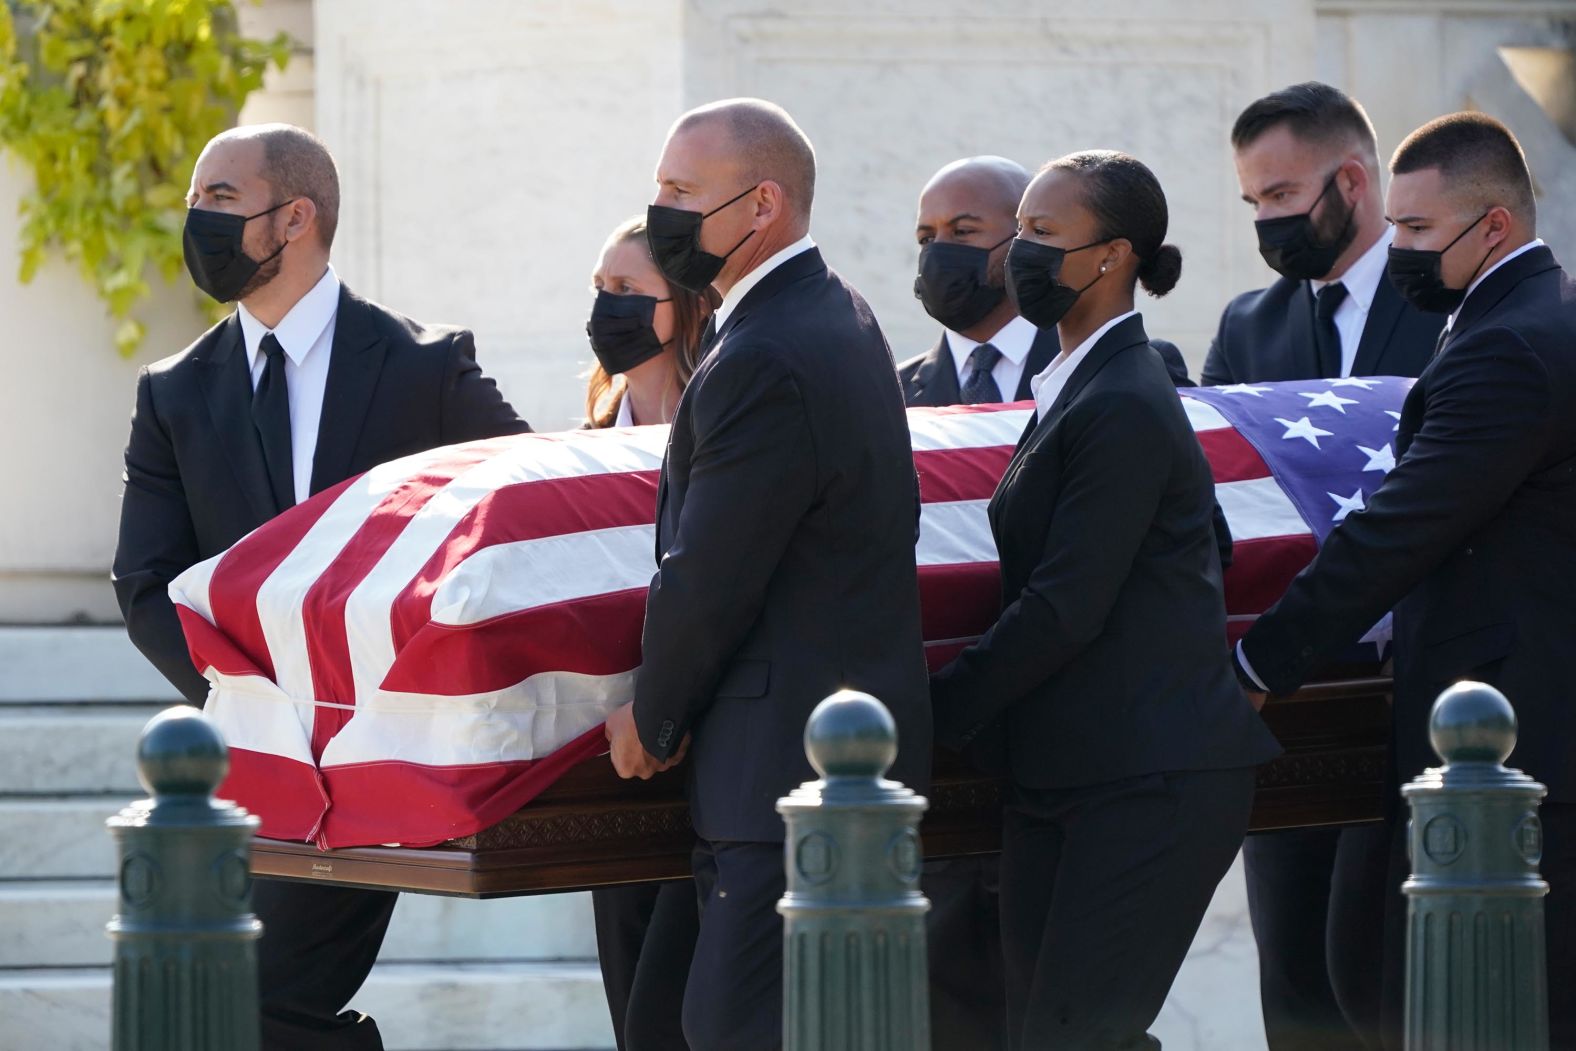 Several of Ginsburg's clerks serve as pallbearers.